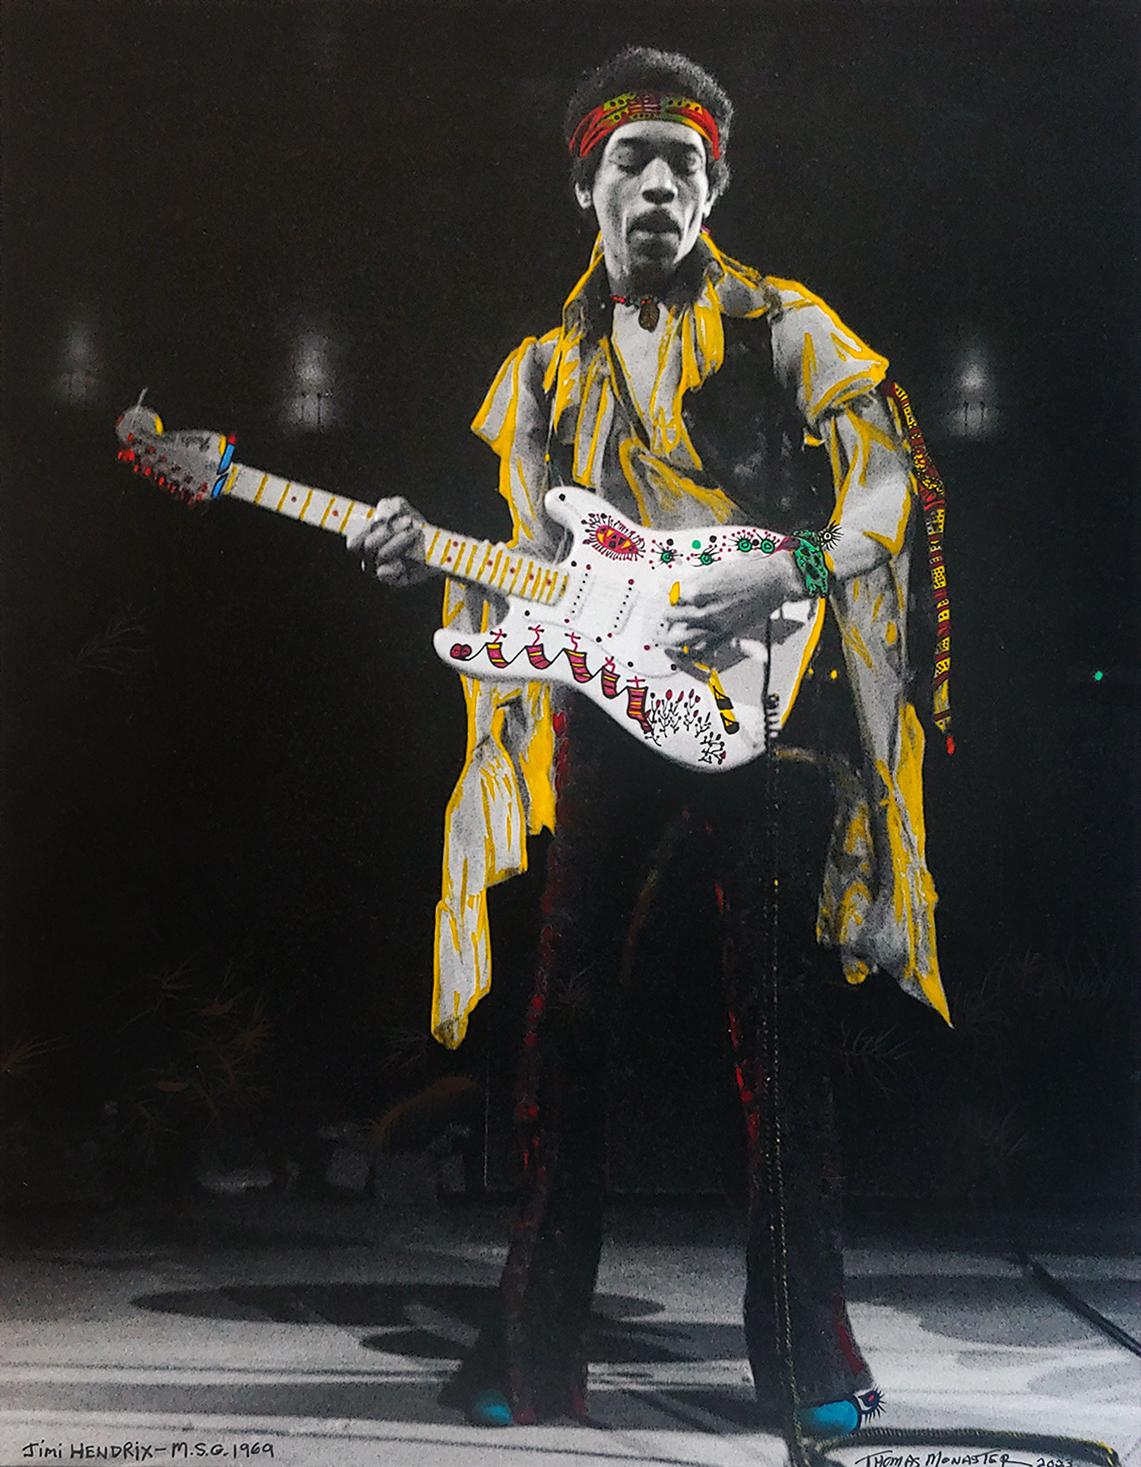 Jimi Hendrix Hand colored by the original photographer 1969 MSG  New York - Photograph by Thomas Monaster